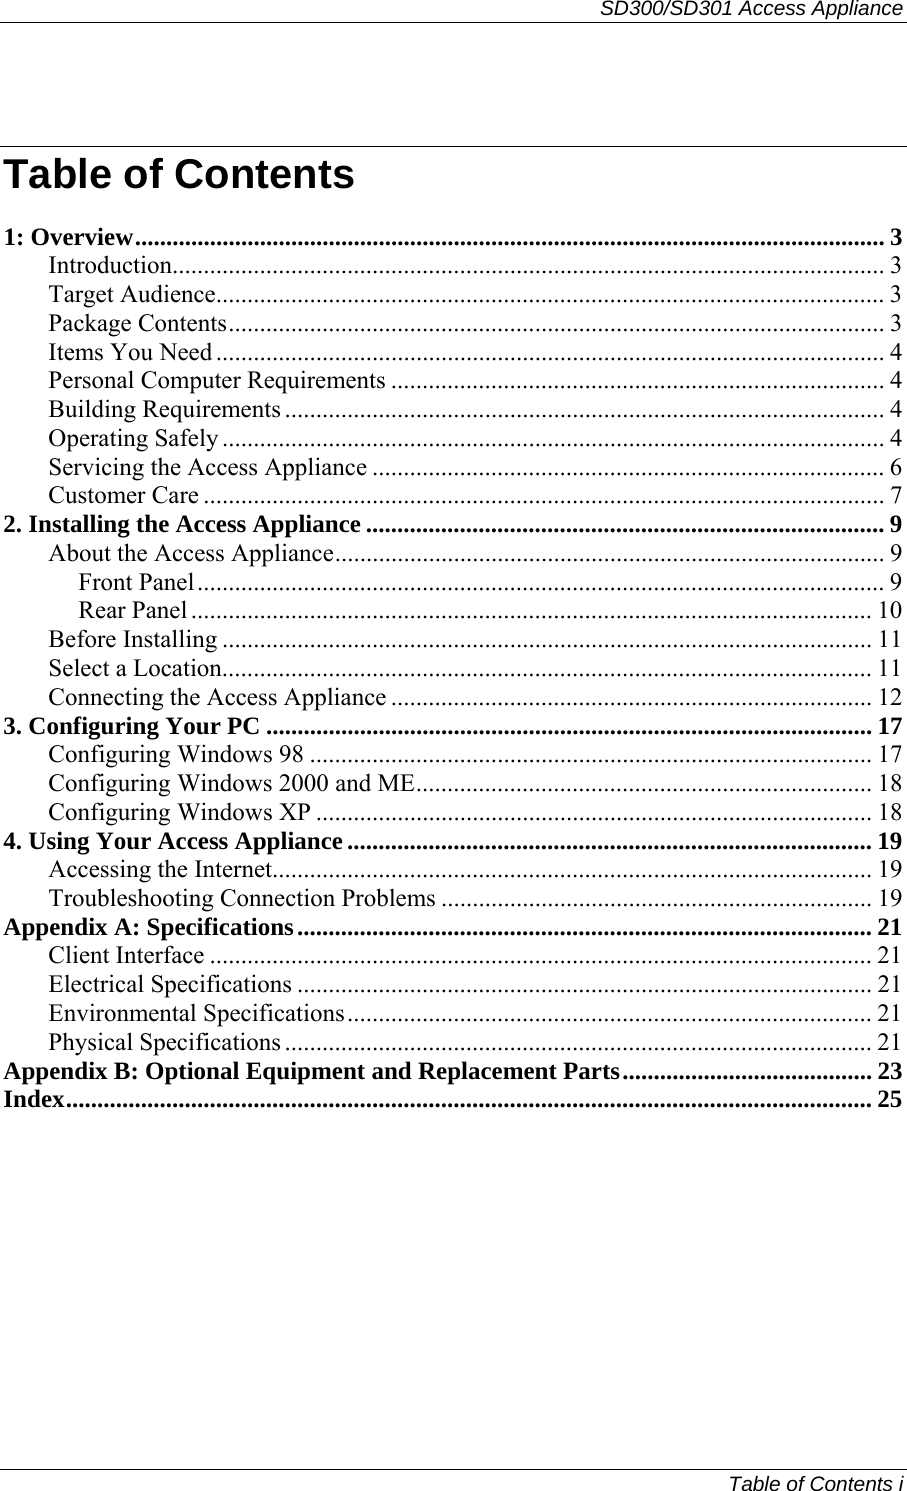 SD300/SD301 Access Appliance  Table of Contents i  Table of Contents 1: Overview........................................................................................................................ 3 Introduction.................................................................................................................. 3 Target Audience........................................................................................................... 3 Package Contents......................................................................................................... 3 Items You Need ........................................................................................................... 4 Personal Computer Requirements ............................................................................... 4 Building Requirements ................................................................................................ 4 Operating Safely .......................................................................................................... 4 Servicing the Access Appliance .................................................................................. 6 Customer Care ............................................................................................................. 7 2. Installing the Access Appliance ................................................................................... 9 About the Access Appliance........................................................................................ 9 Front Panel.............................................................................................................. 9 Rear Panel ............................................................................................................. 10 Before Installing ........................................................................................................ 11 Select a Location........................................................................................................ 11 Connecting the Access Appliance ............................................................................. 12 3. Configuring Your PC ................................................................................................. 17 Configuring Windows 98 .......................................................................................... 17 Configuring Windows 2000 and ME......................................................................... 18 Configuring Windows XP ......................................................................................... 18 4. Using Your Access Appliance .................................................................................... 19 Accessing the Internet................................................................................................ 19 Troubleshooting Connection Problems ..................................................................... 19 Appendix A: Specifications............................................................................................ 21 Client Interface .......................................................................................................... 21 Electrical Specifications ............................................................................................ 21 Environmental Specifications.................................................................................... 21 Physical Specifications .............................................................................................. 21 Appendix B: Optional Equipment and Replacement Parts........................................ 23 Index................................................................................................................................. 25  